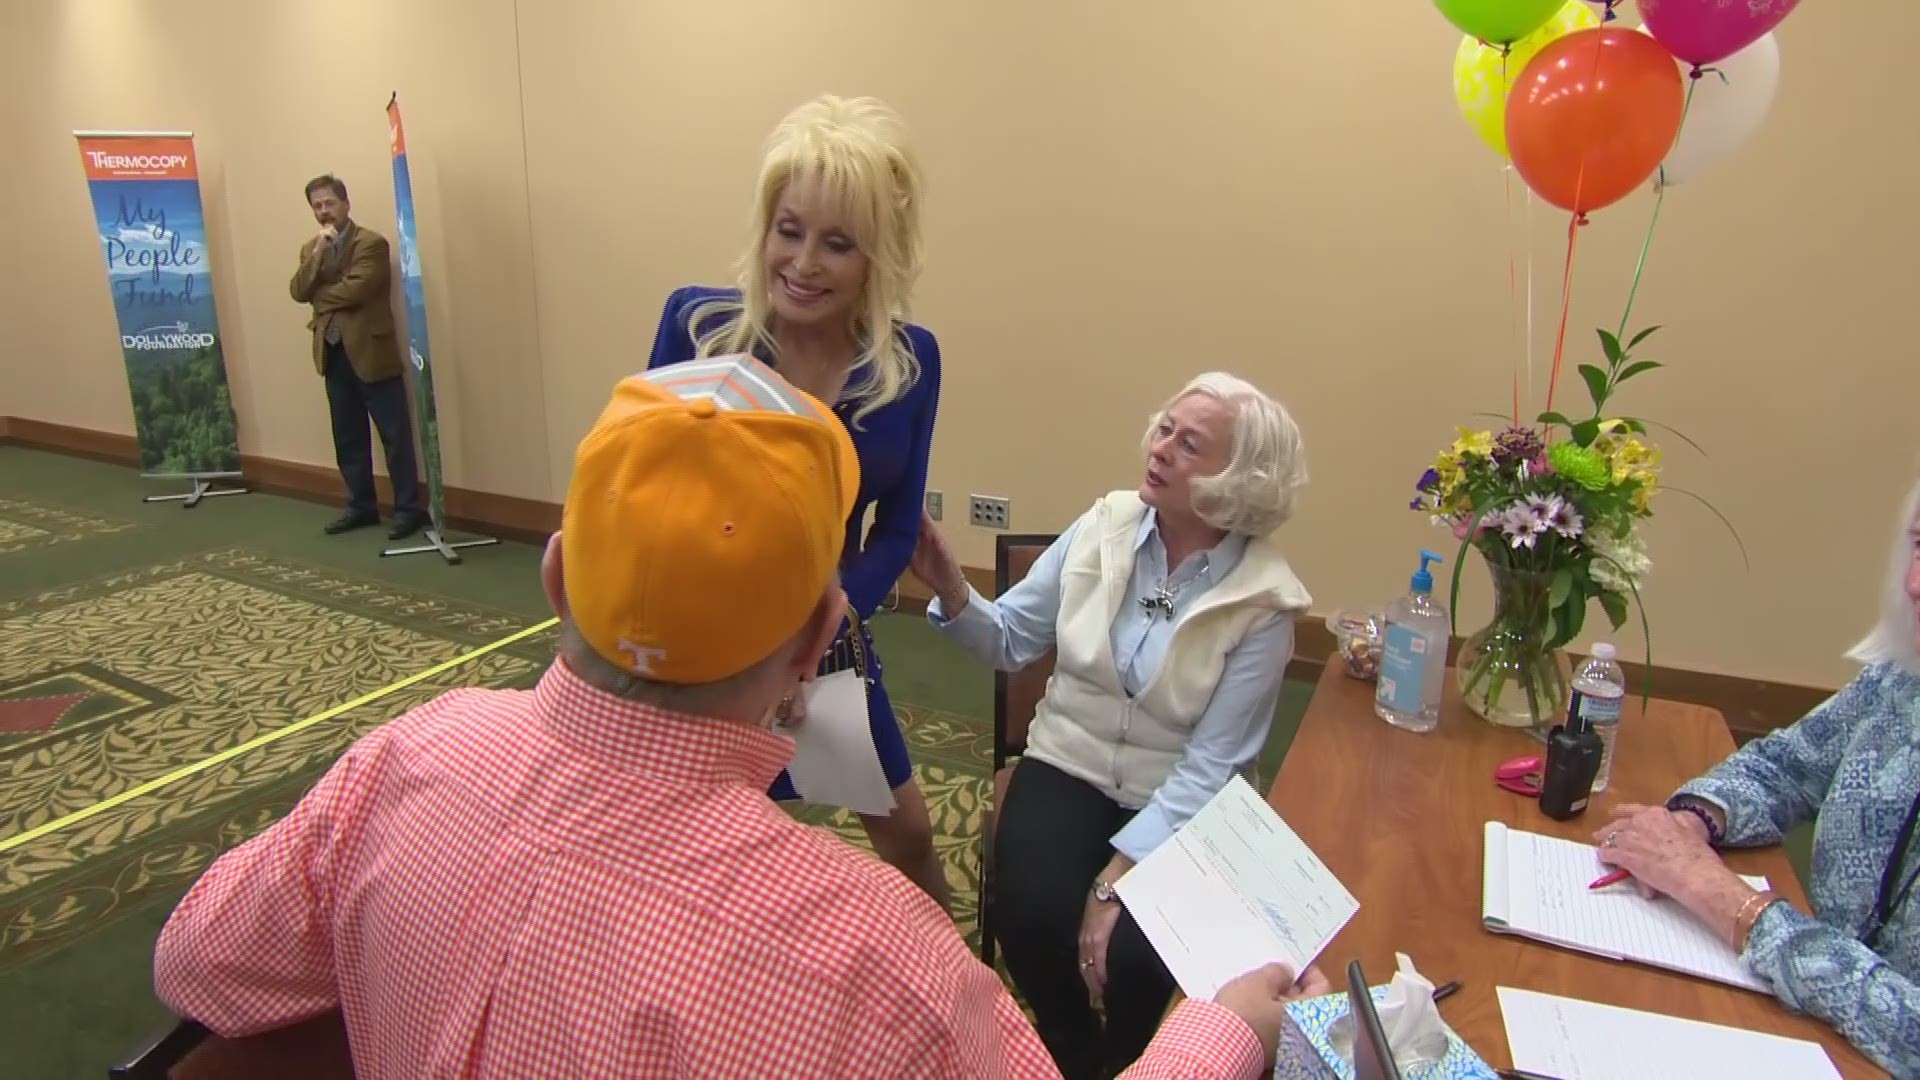 Dolly handed over a $5000 check to each wildfire survivor, instead of the $1000 they were expecting. Video courtesy: Dollywood Foundation